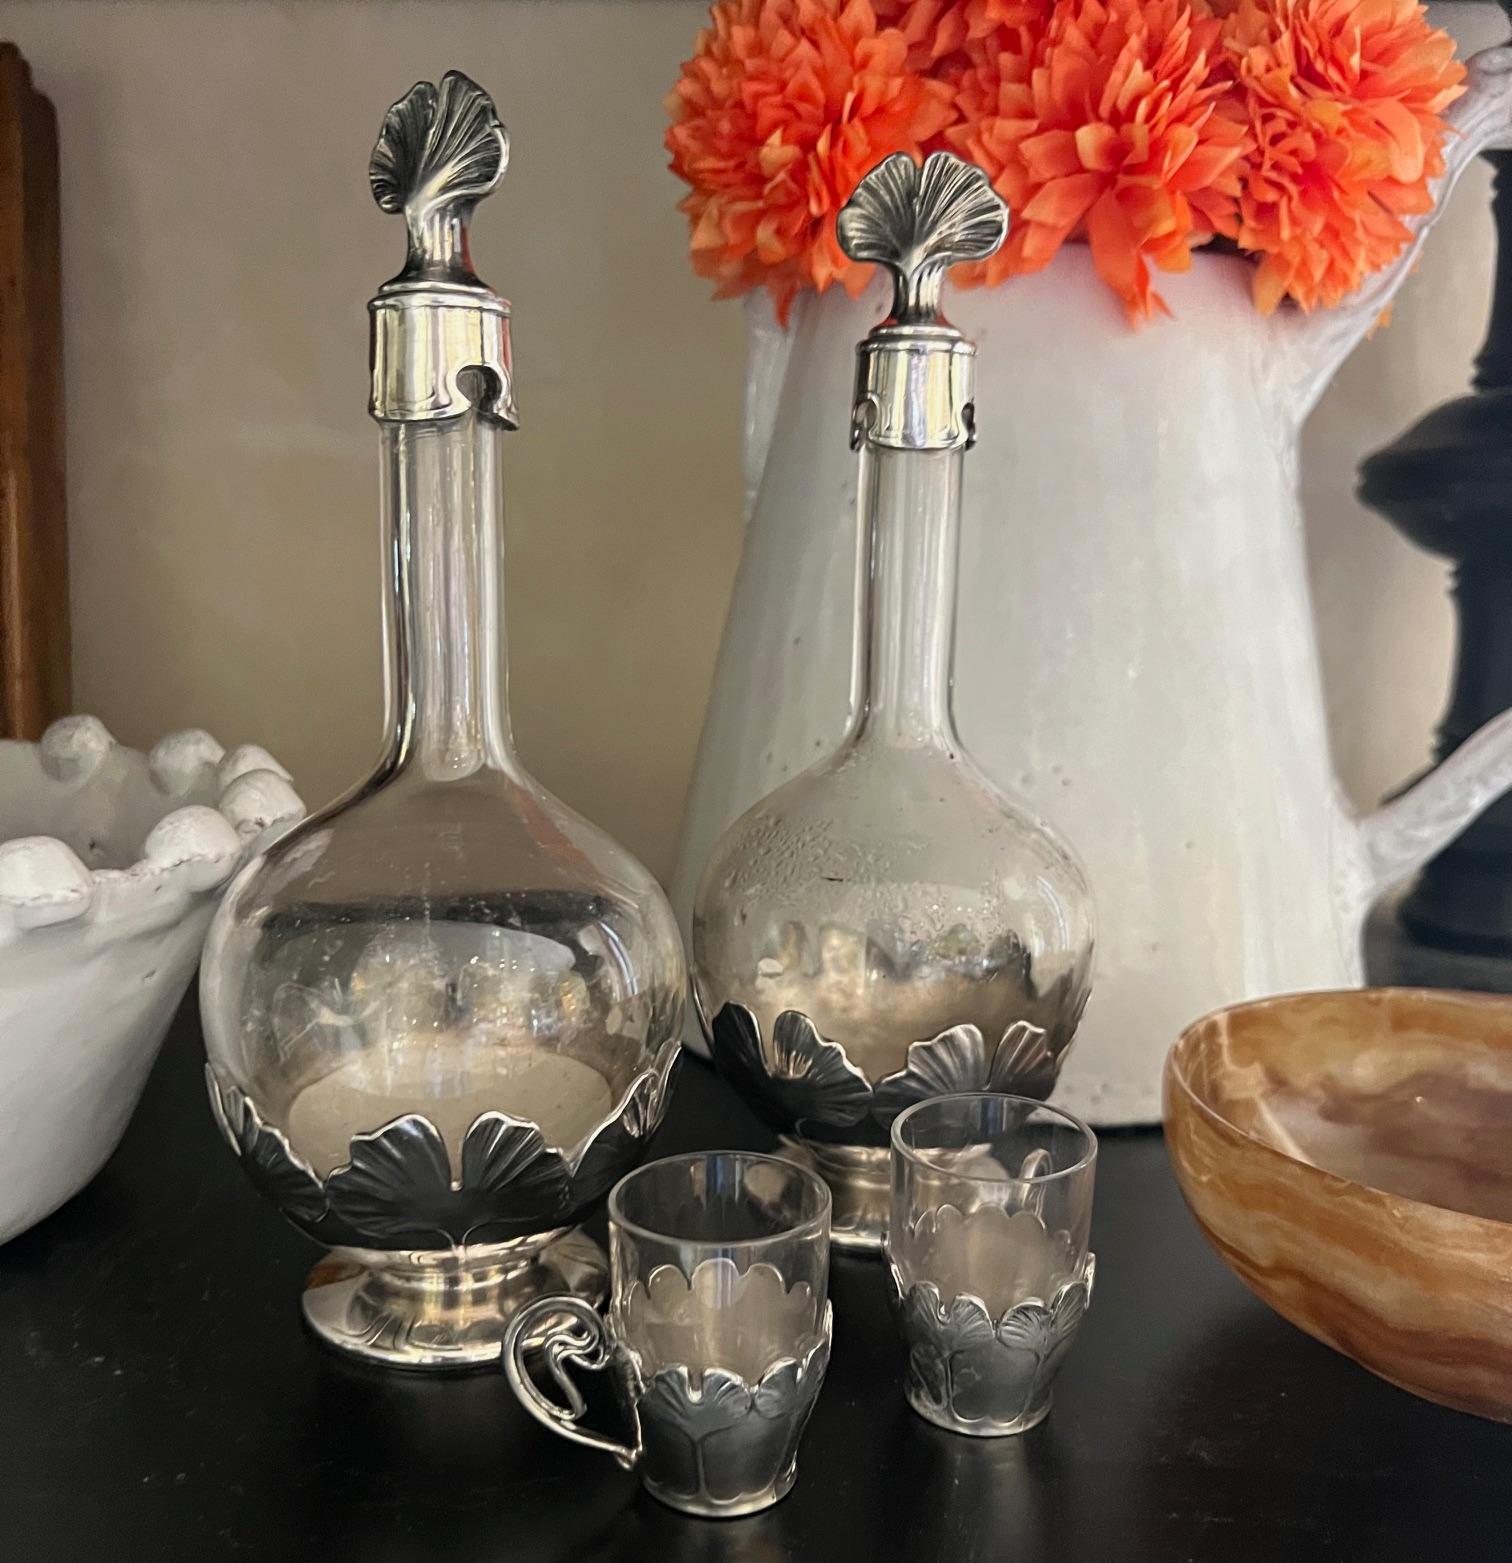 Set of two decanters with stoppers and a set of six glasses with casing from Christofle for its Gallia line, made in France in the early part of the 20th century. The line was created for beautifully designed pieces from the French Art Nouveau and